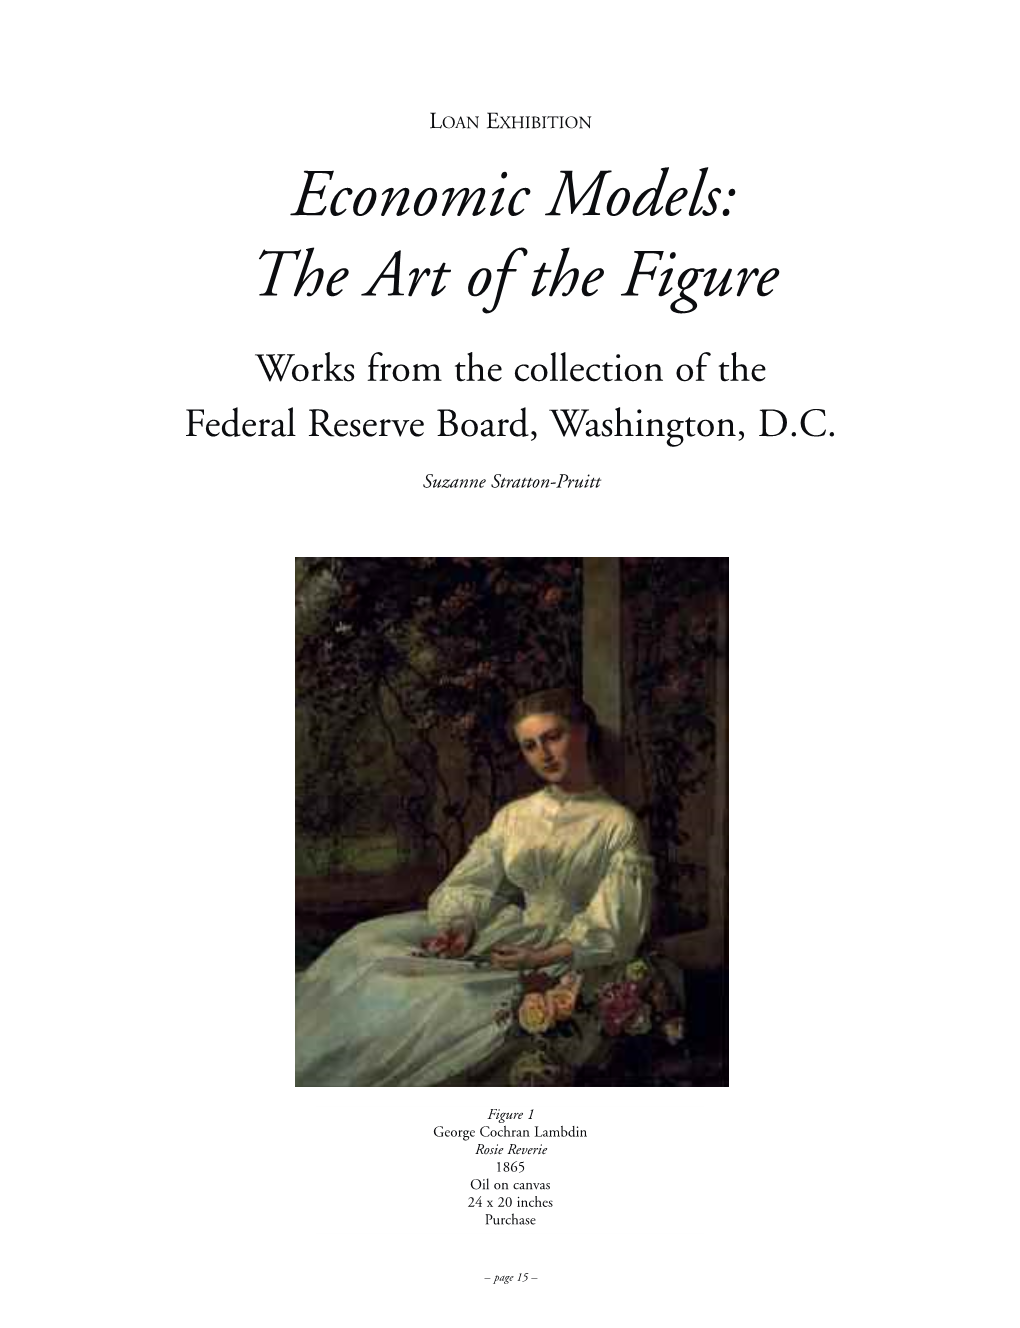 Economic Models: the Art of the Figure Works from the Collection of the Federal Reserve Board, Washington, D.C